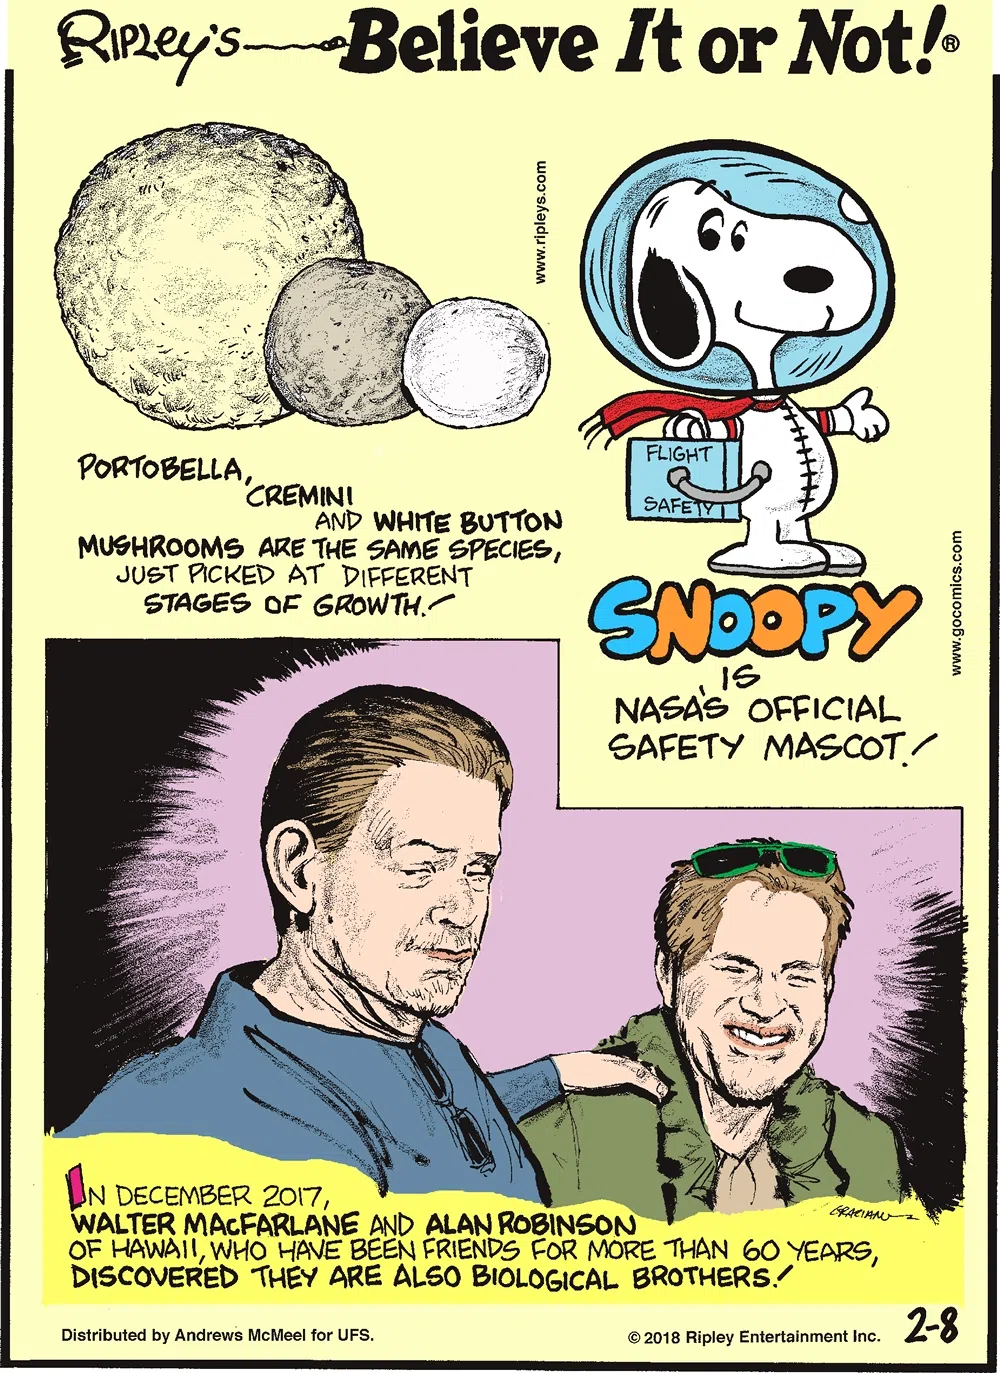 Portobella, cremini and white button mushrooms are the same species, just picked at different stages of growth!-------------------- Snoopy is NASA's official safety mascot!-------------------- In December 2017, Walter MacFarlane and Alan Robinson of Hawaii, who have been friends for more than 60 years, discovered they are also biological brothers!